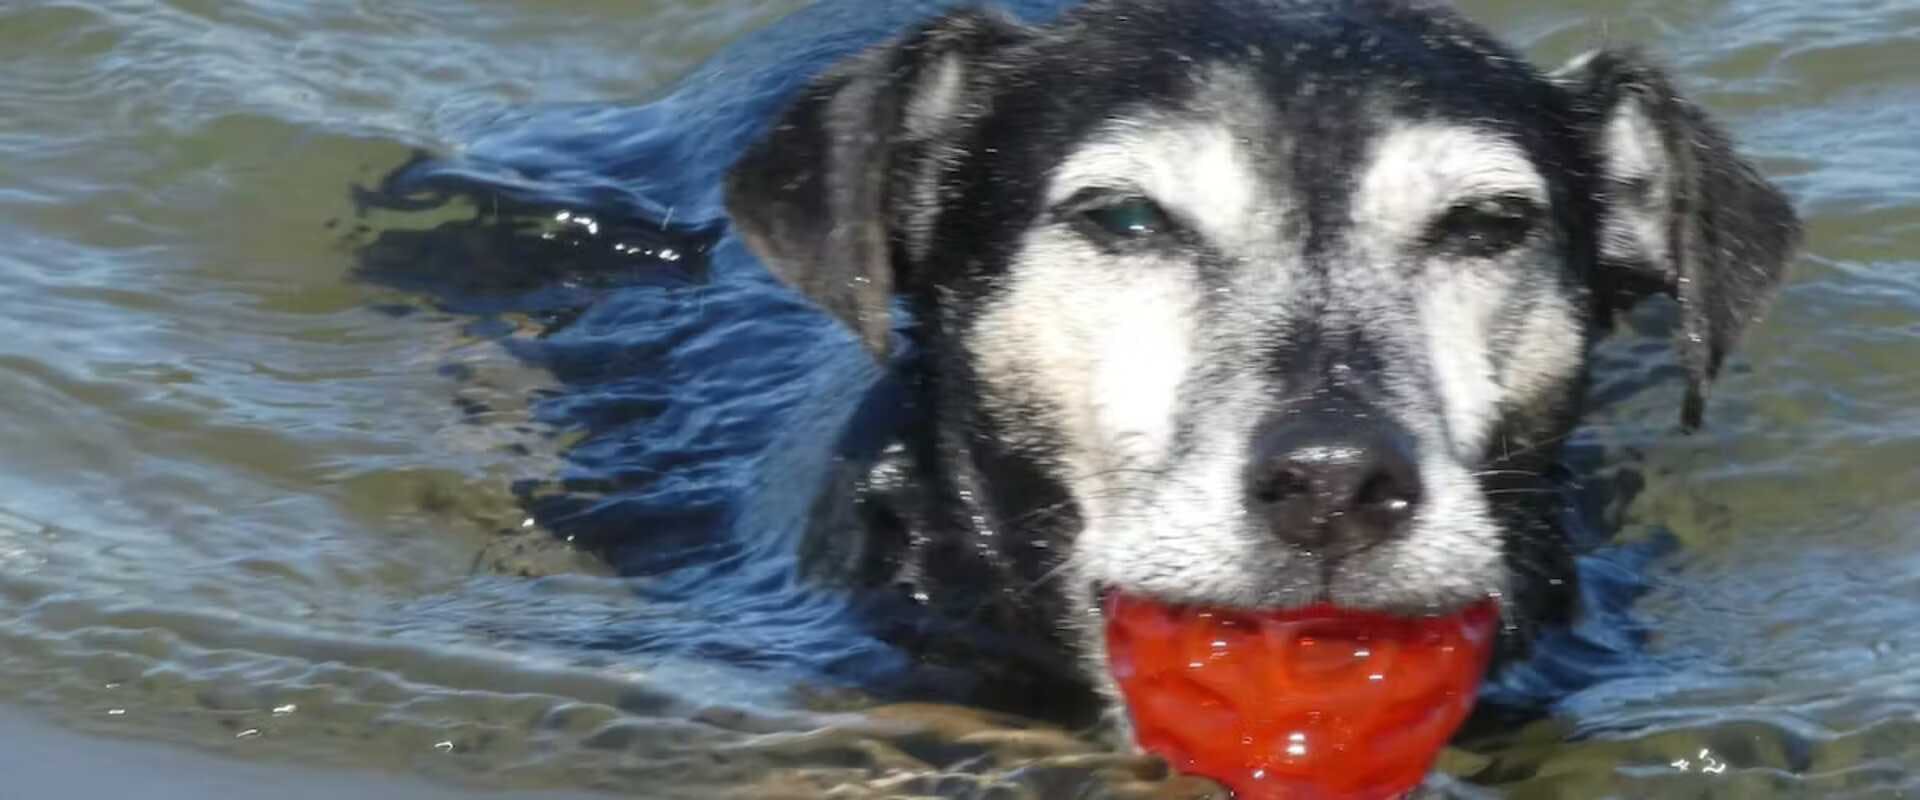 A dog swimming with a ball in its mouth